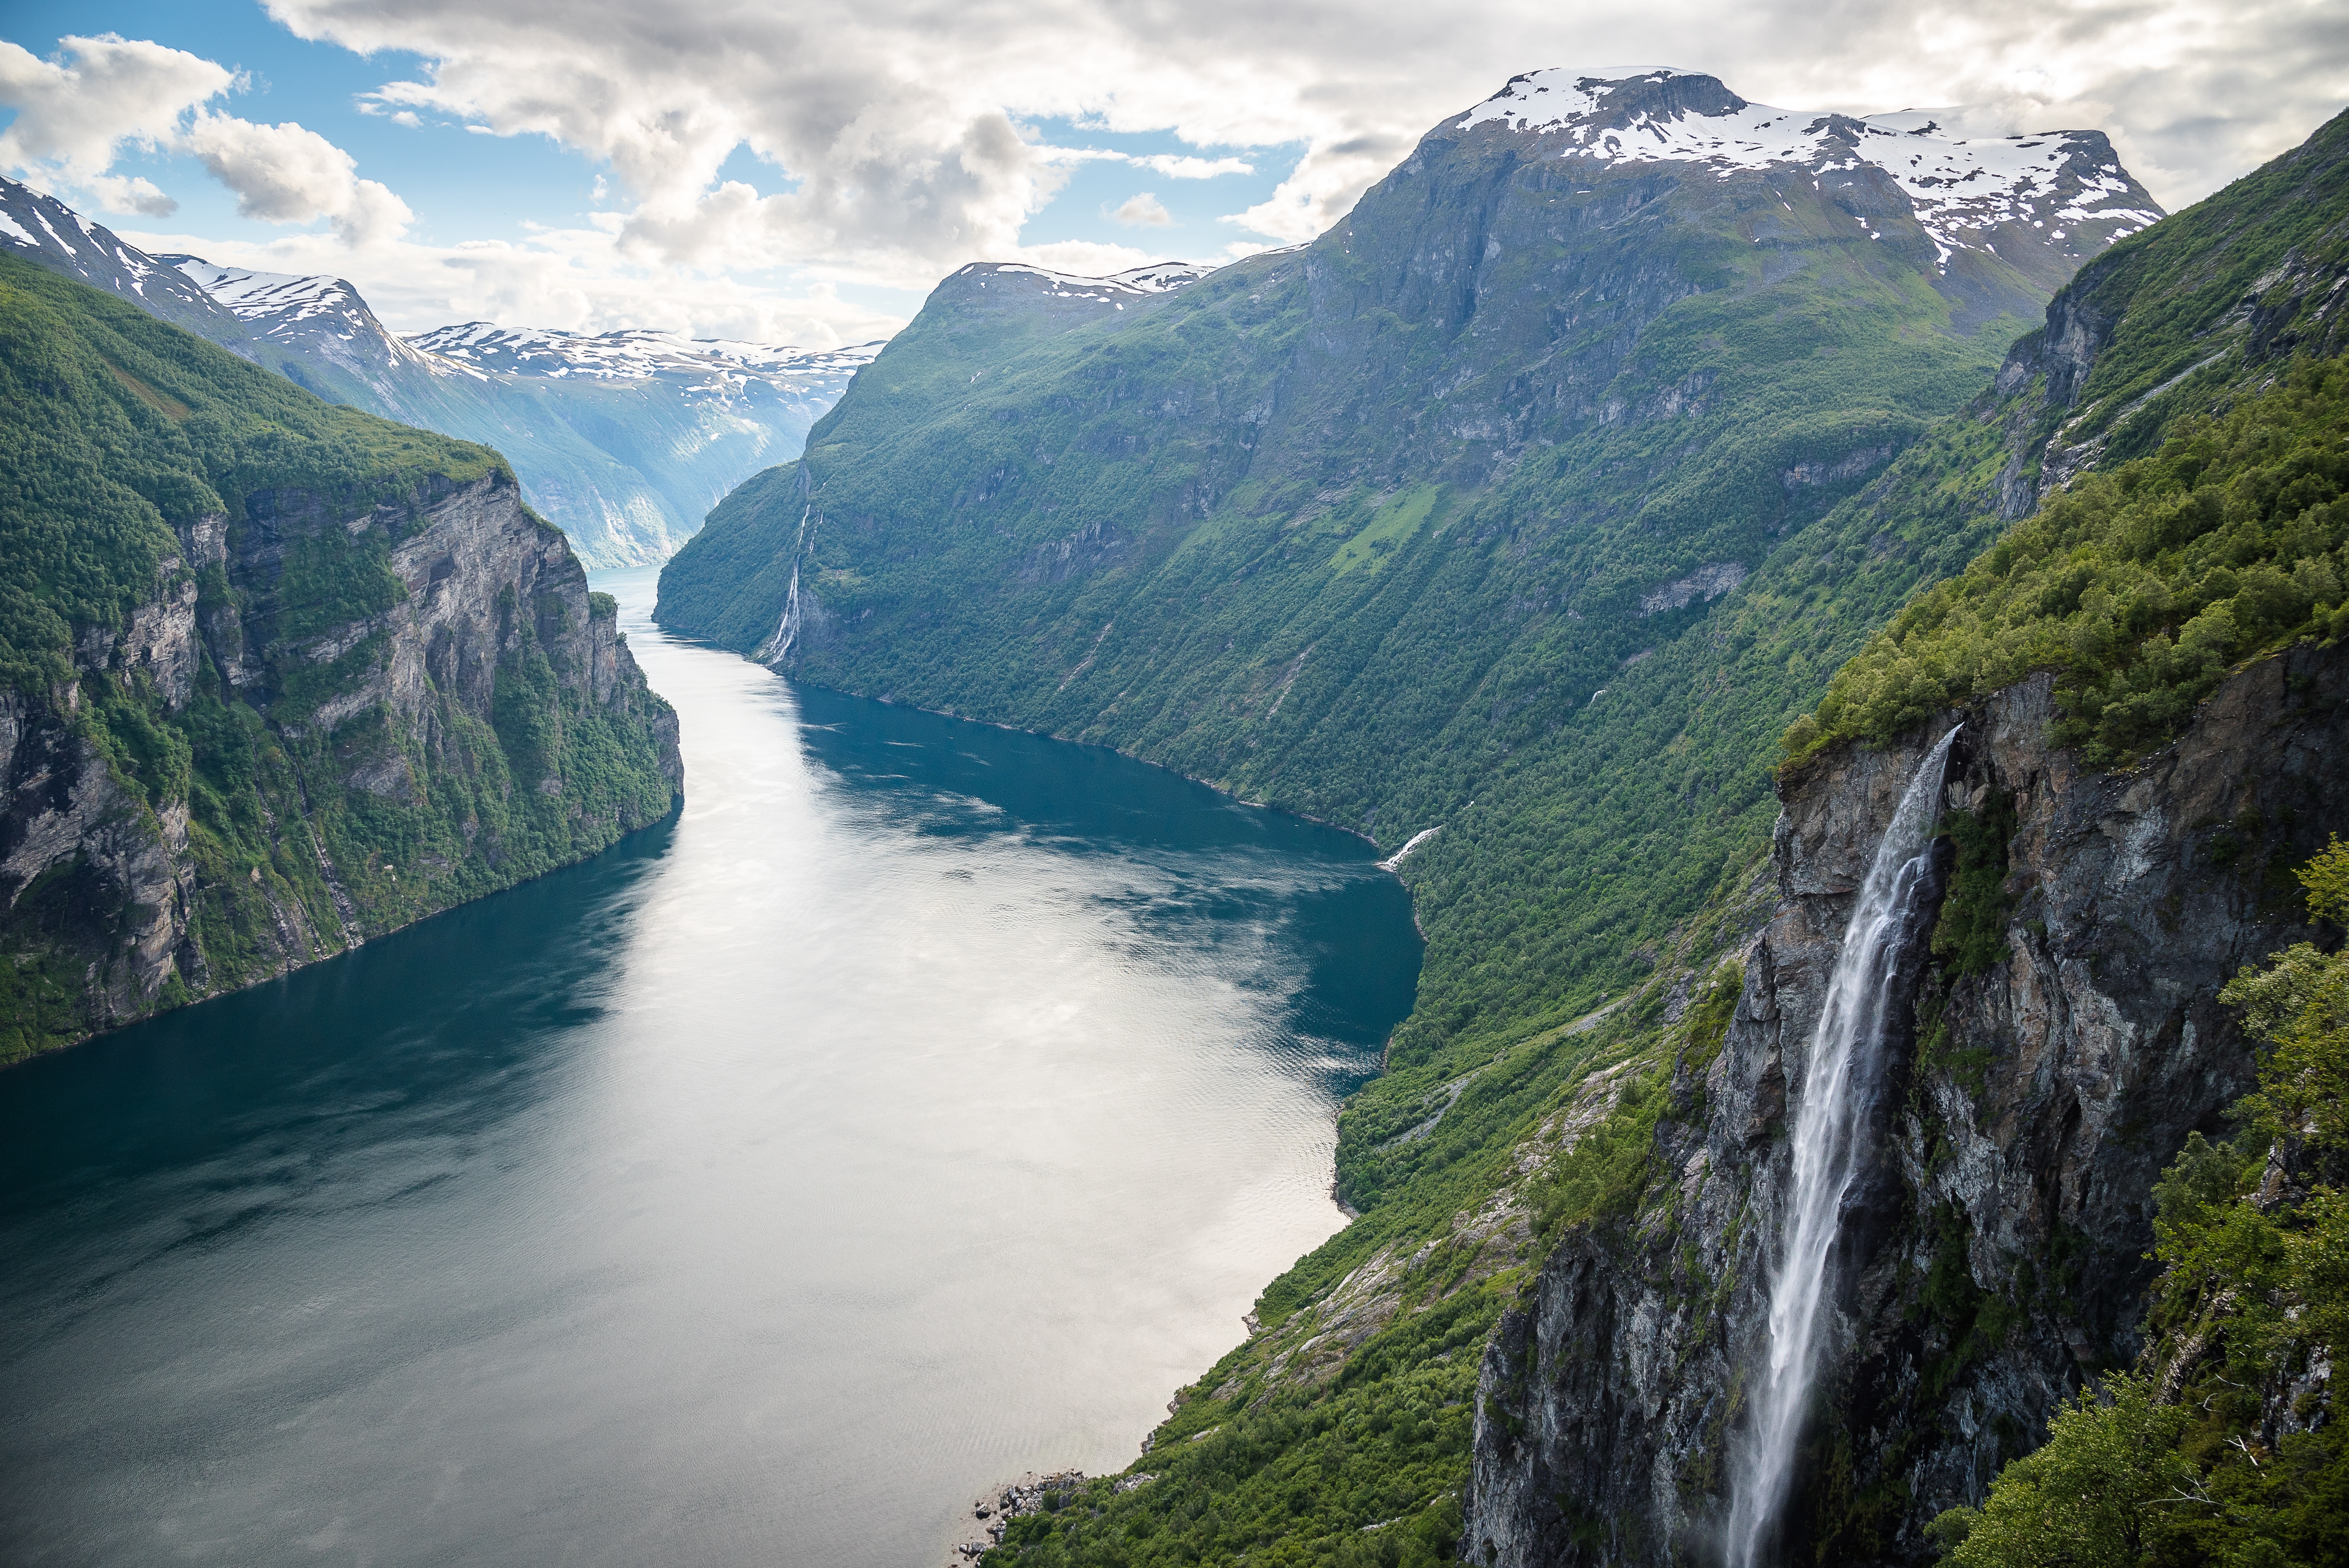 NORWAY’S FJORDS: DID YOU KNOW